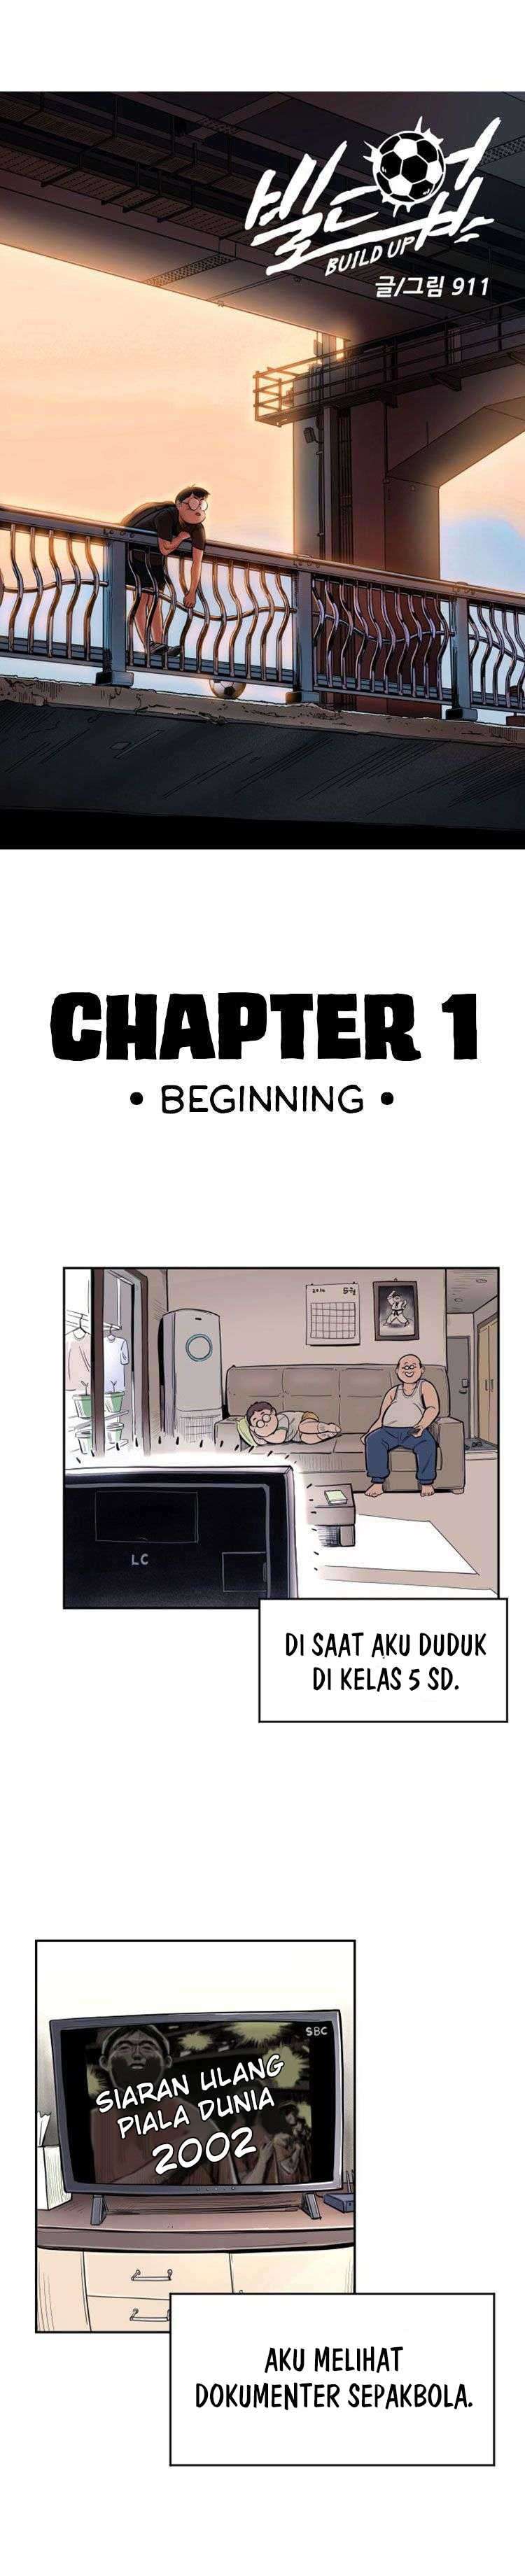 Build Up Chapter 01